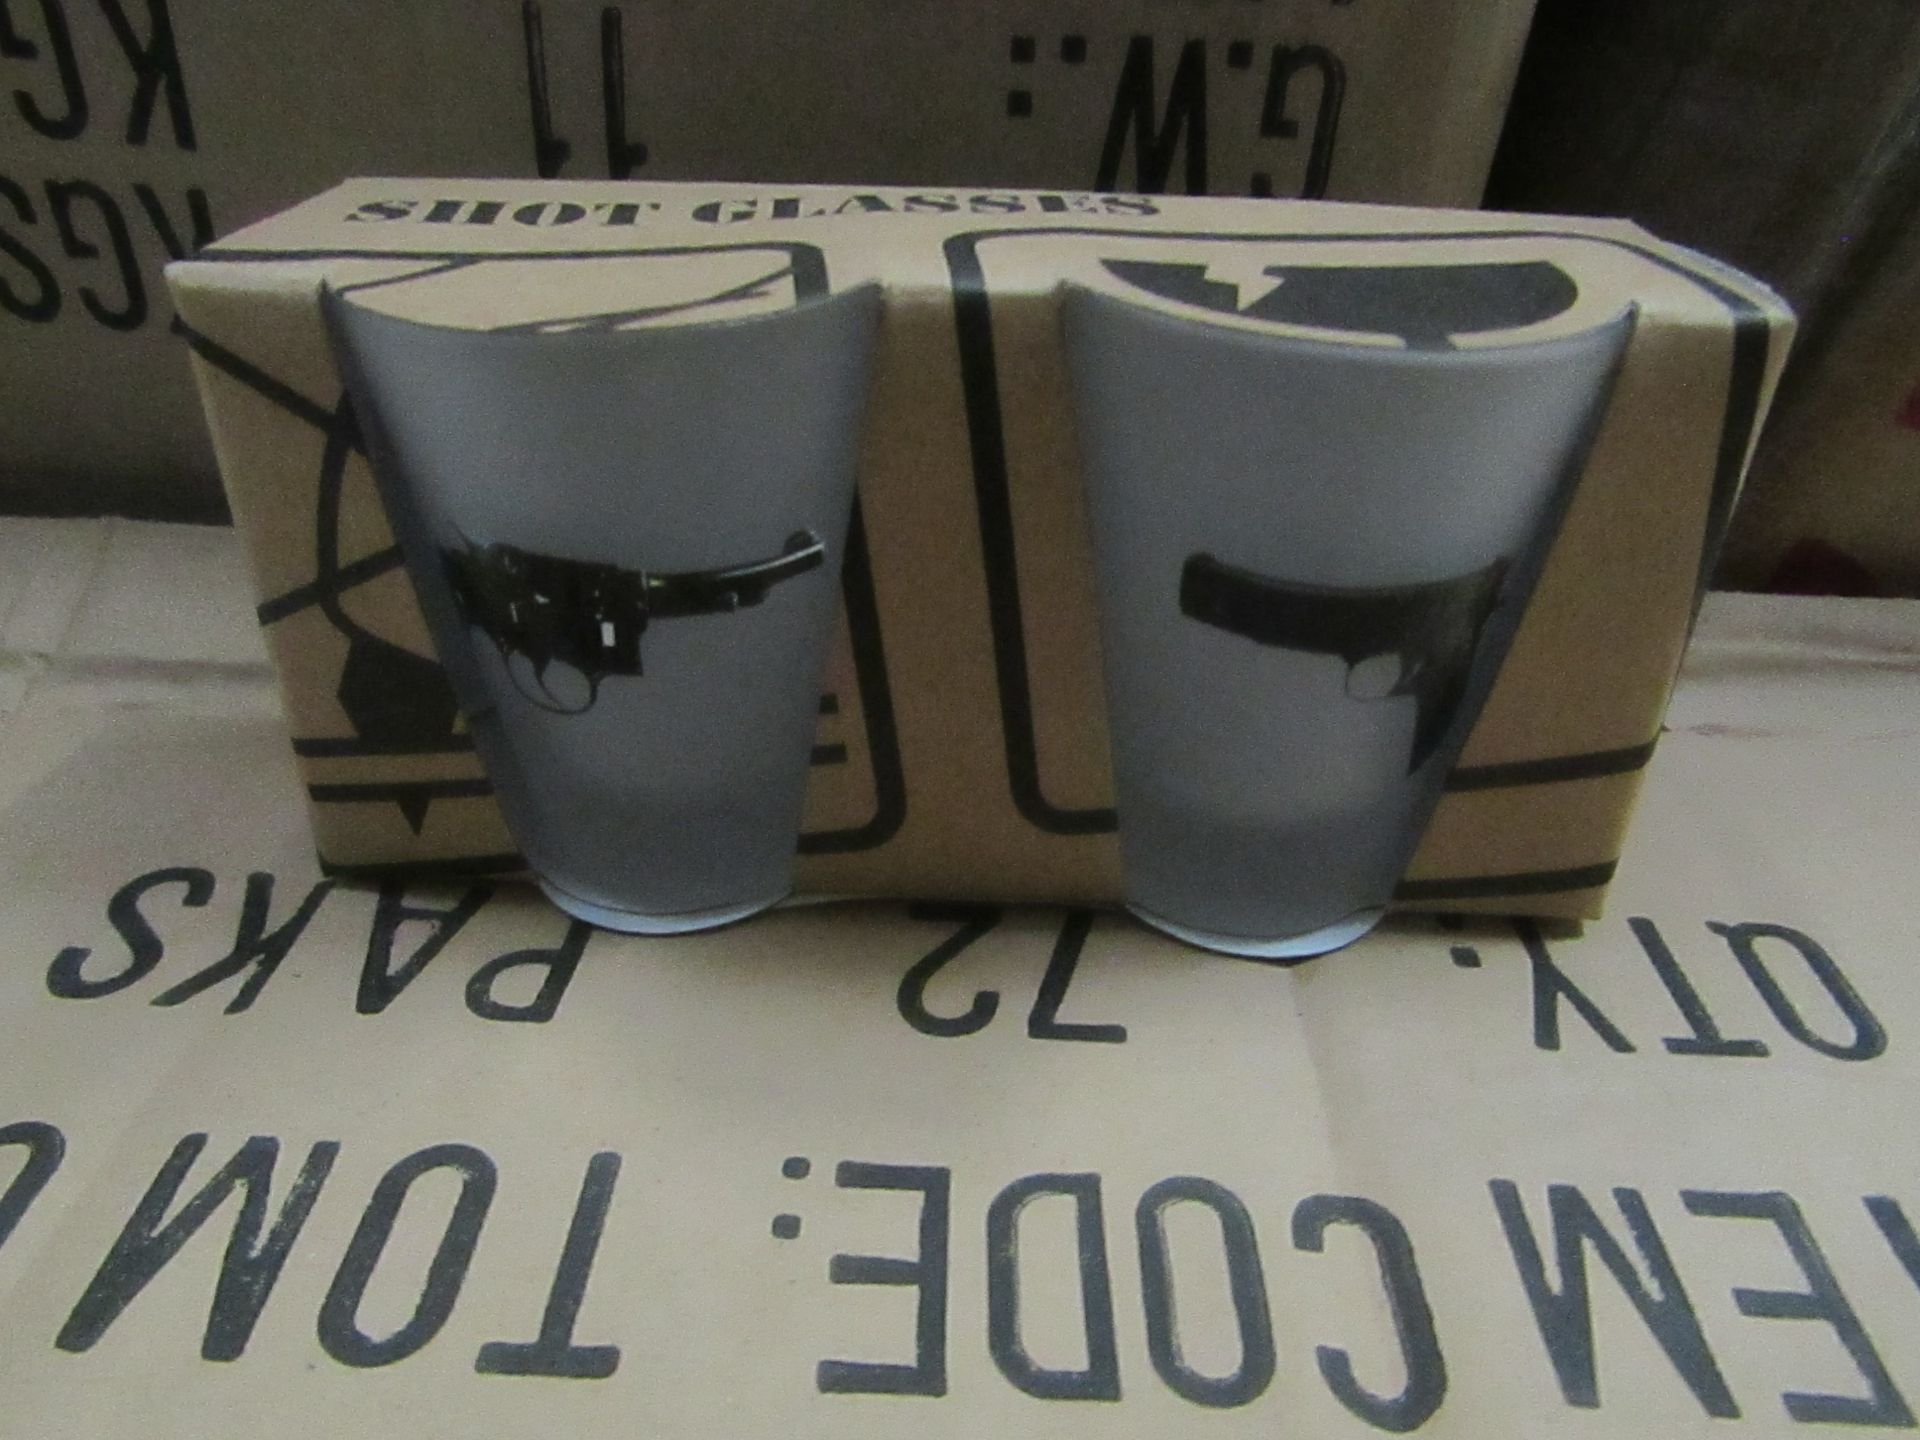 Tom's Depot - Shot Glasses (Cloudy With Gun Photos) - 2x Box of 6 - New & Boxed.